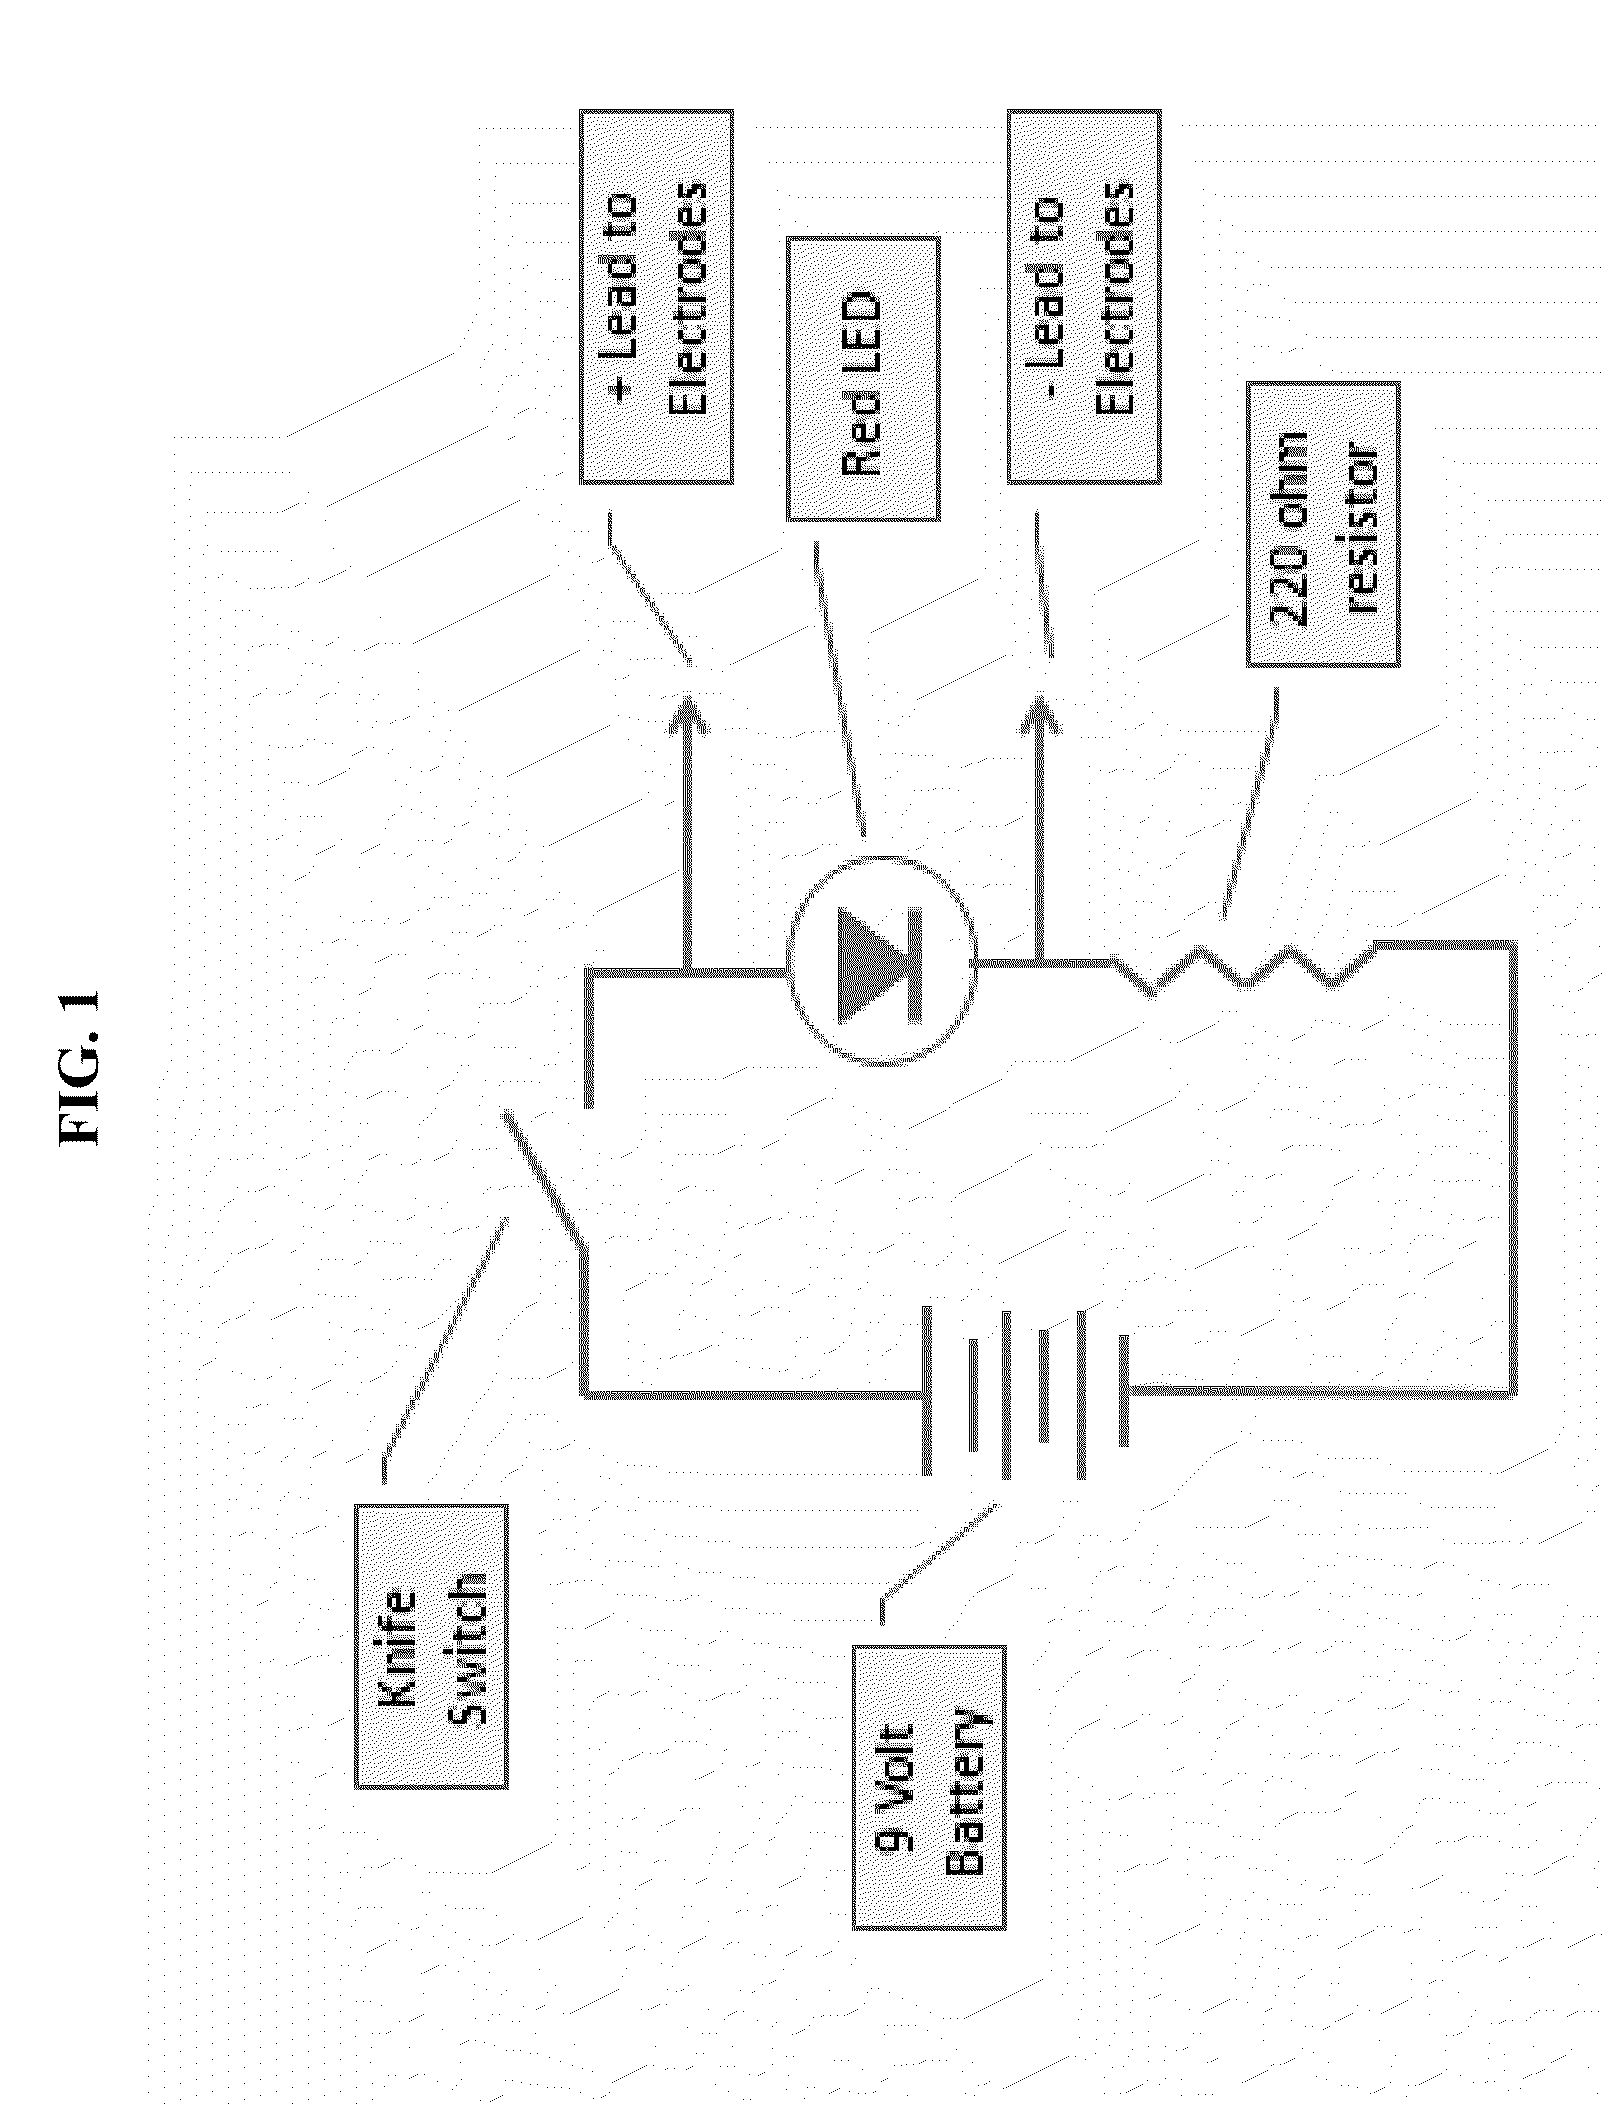 Device for accelerated aging of wine